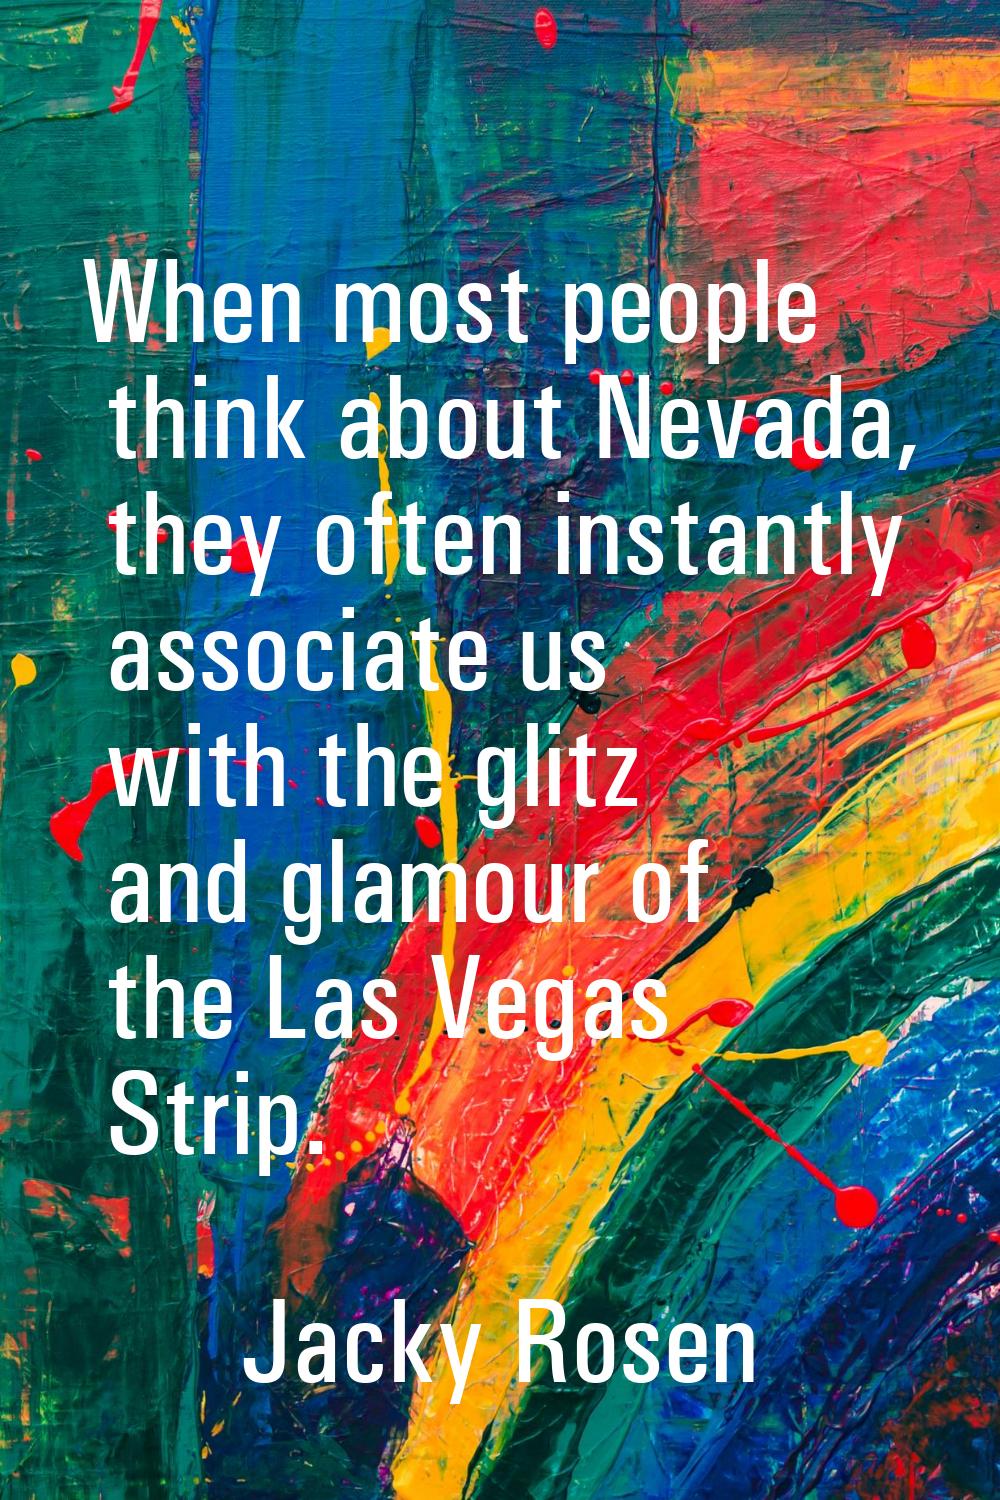 When most people think about Nevada, they often instantly associate us with the glitz and glamour o